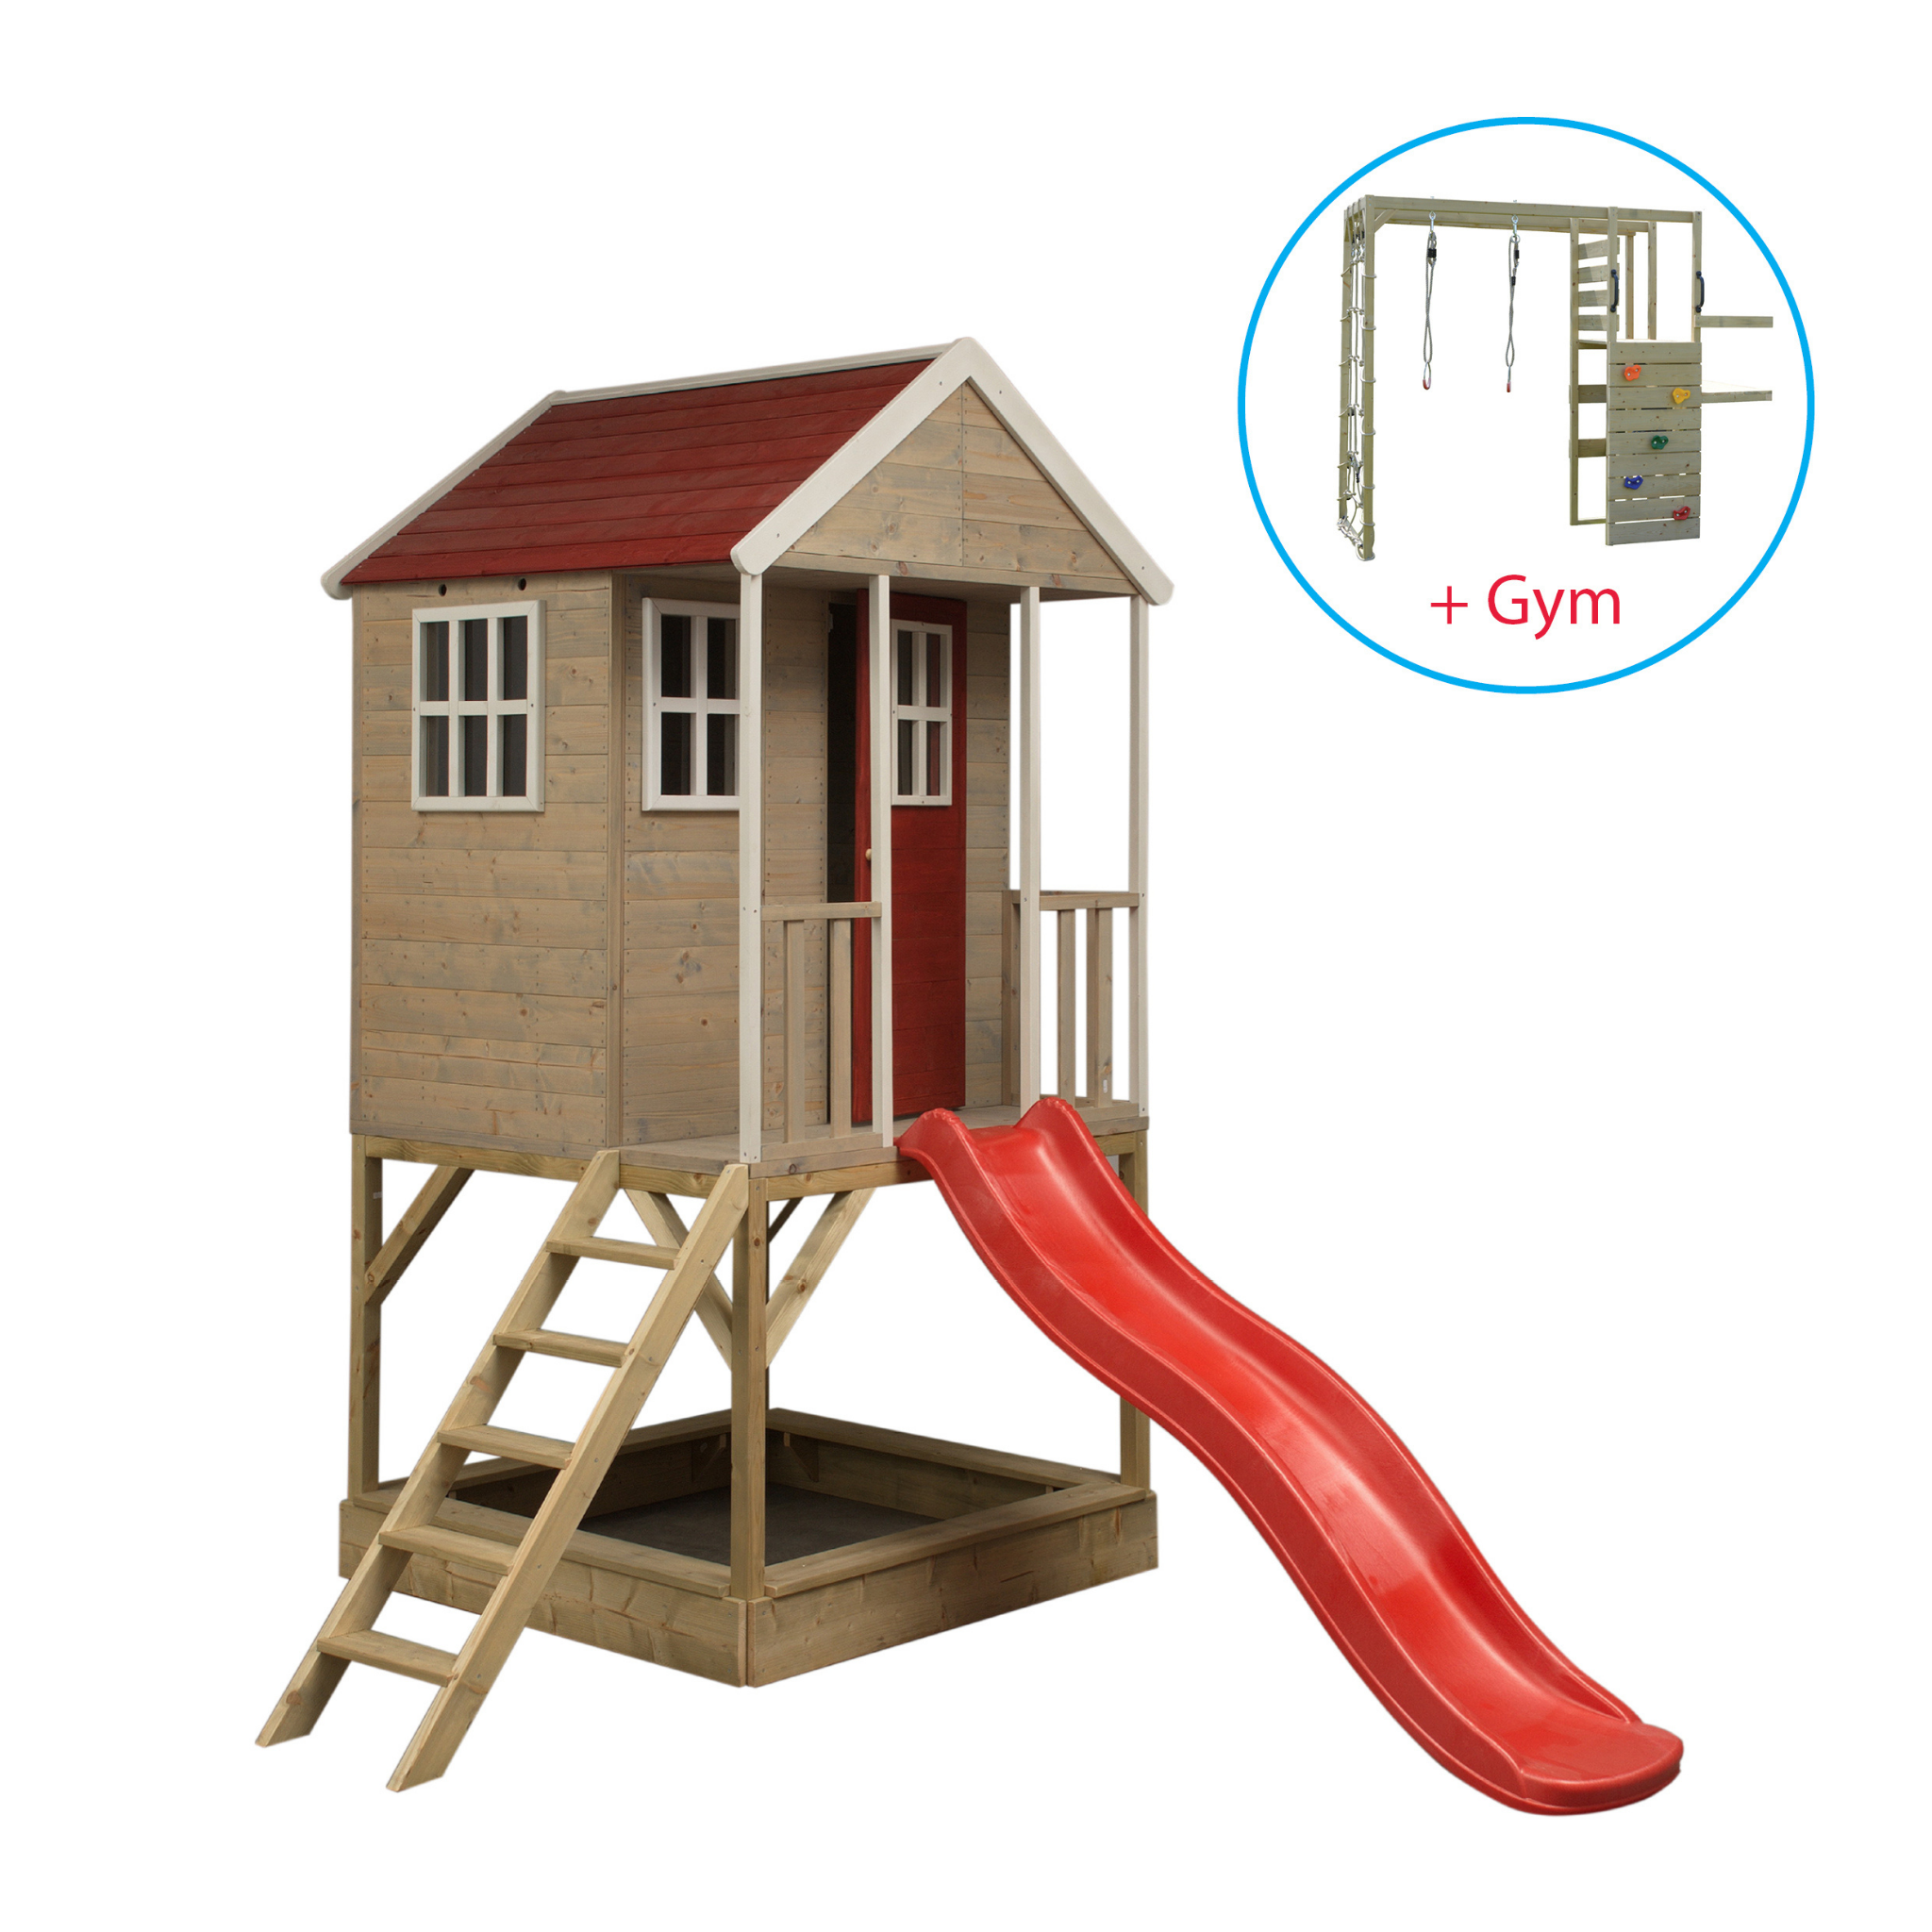 M8R-G Nordic Adventure House with Platform and Slide + Gym Attachment